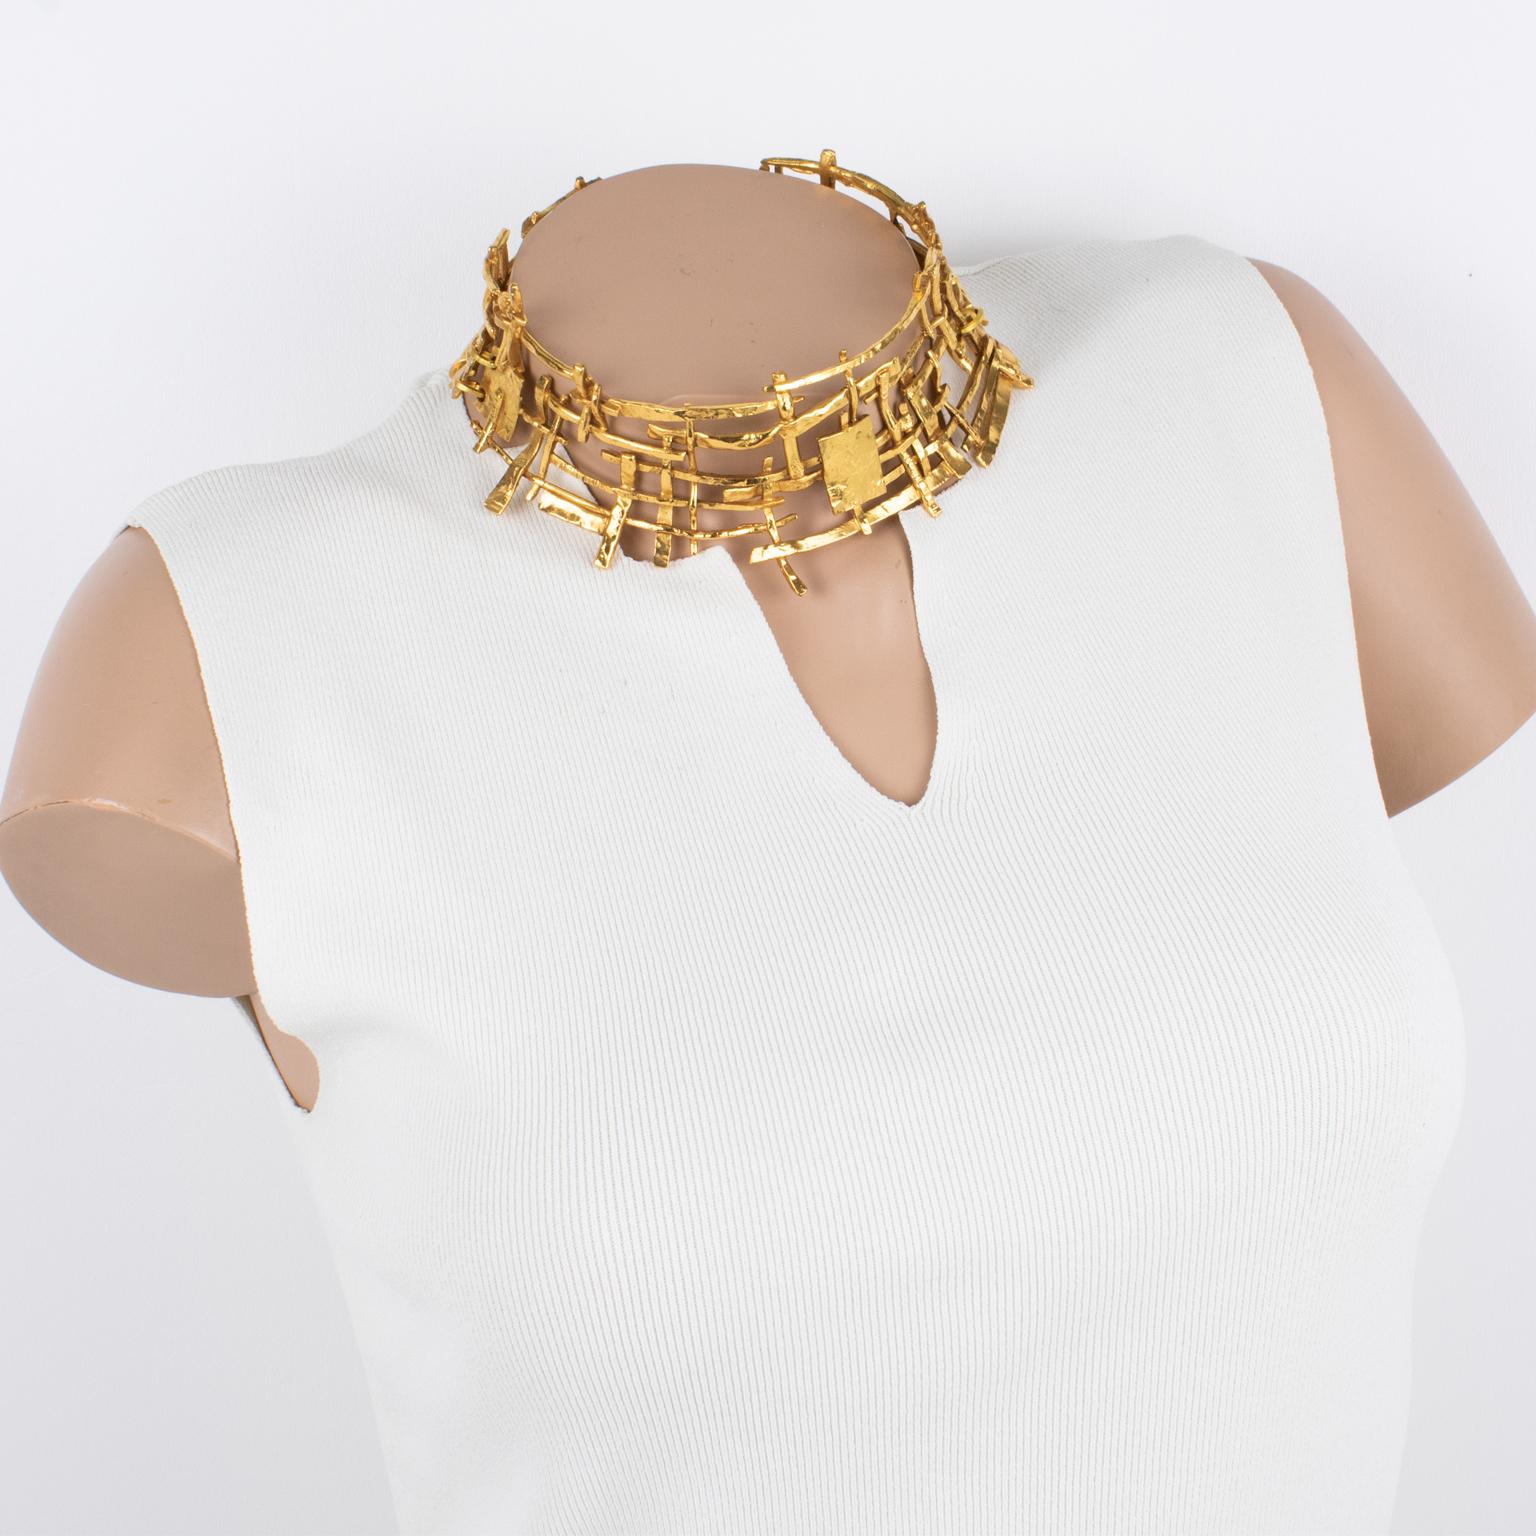 This spectacular around-the-neck necklace was designed in the 1990s by a French designer studio. The massive torque shape features a brutalist futuristic carved and see-thru design built with fine gilded metal. The piece is articulated in three